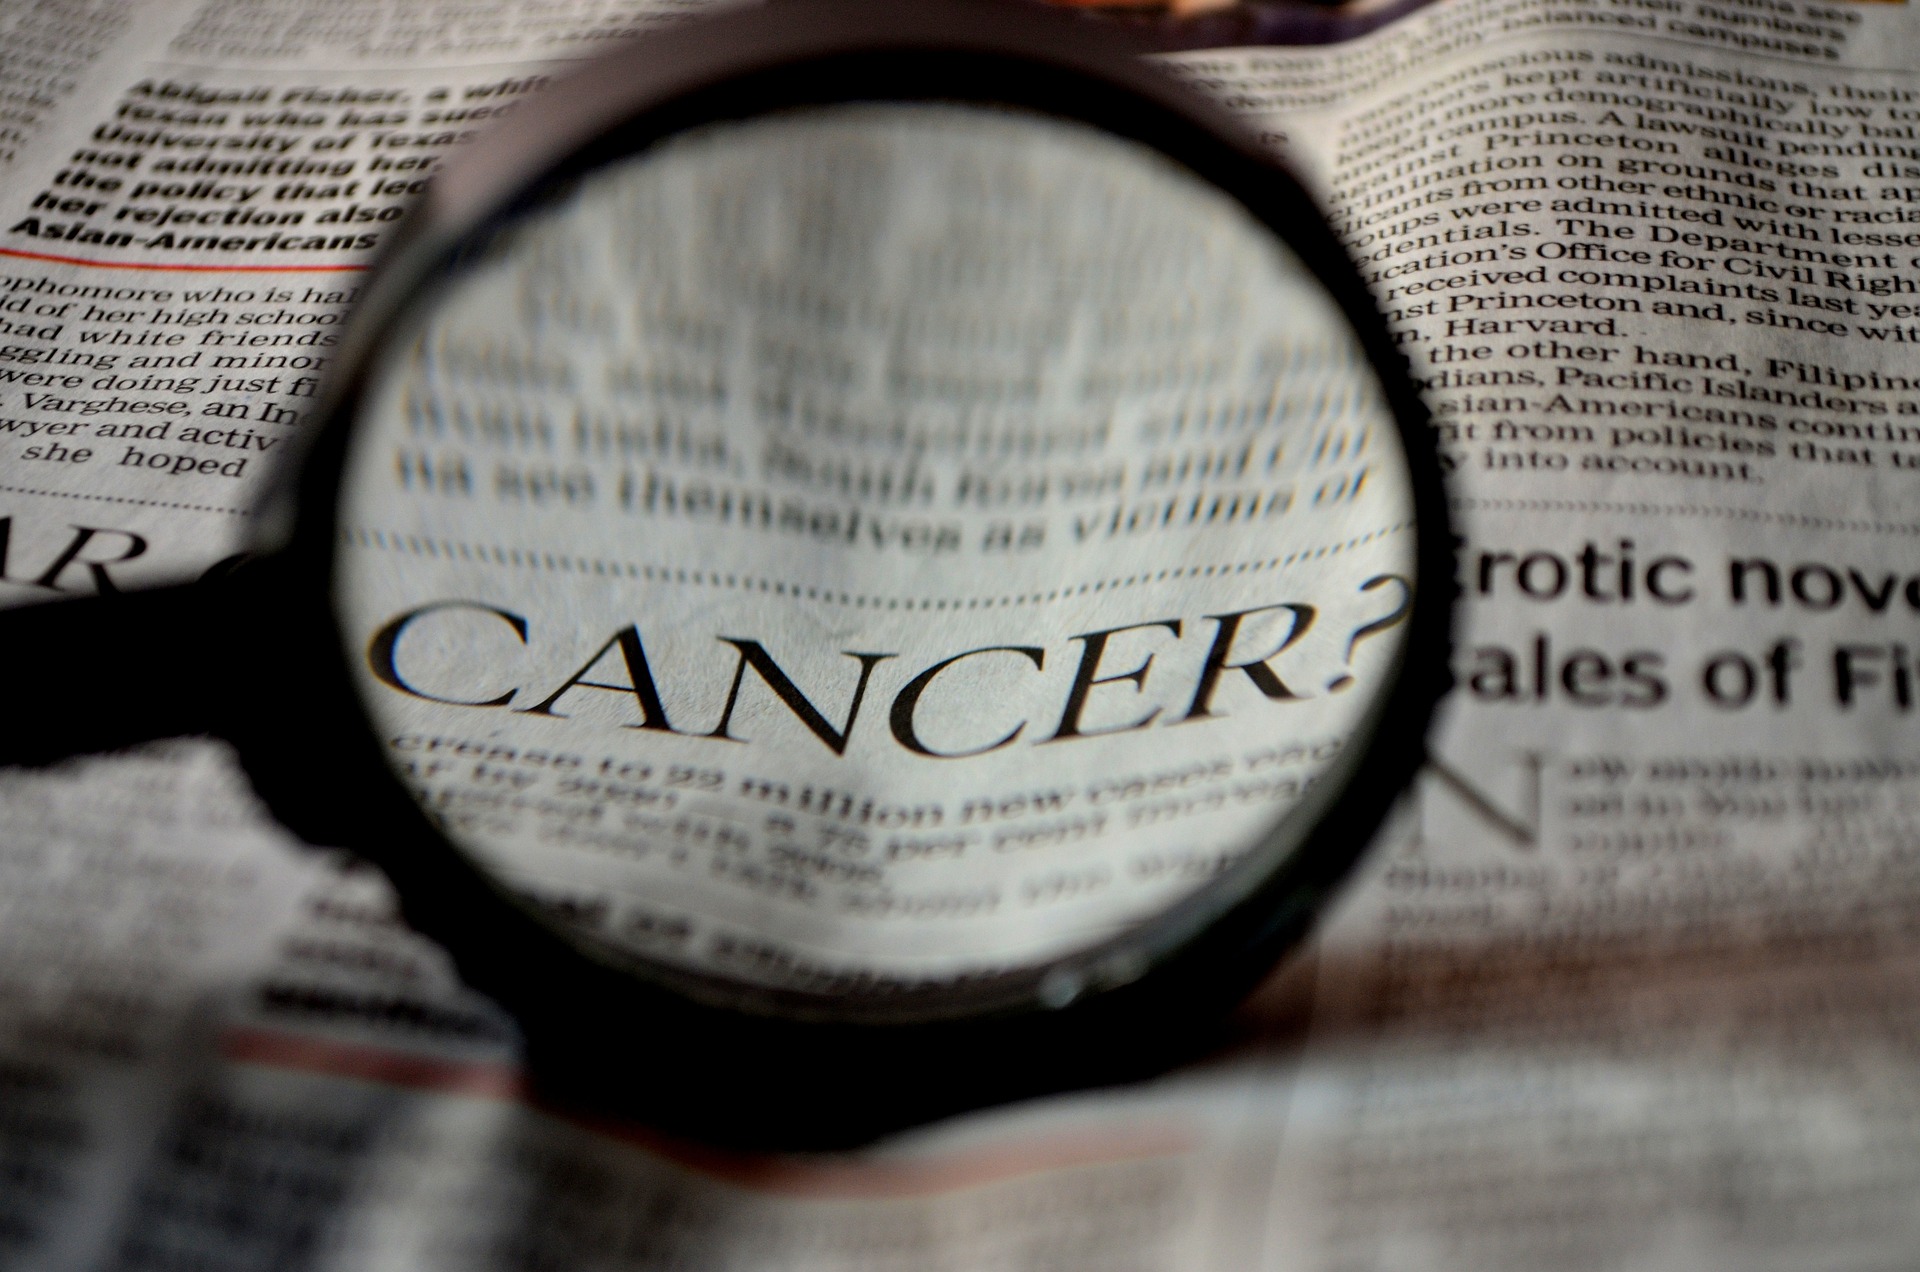 A newspaper with the word “Cancer” magnified - our medical negligence compensation solicitors can help you make a no win no fee claim.  Click on this link to visit our Cancer negligence compensation page.